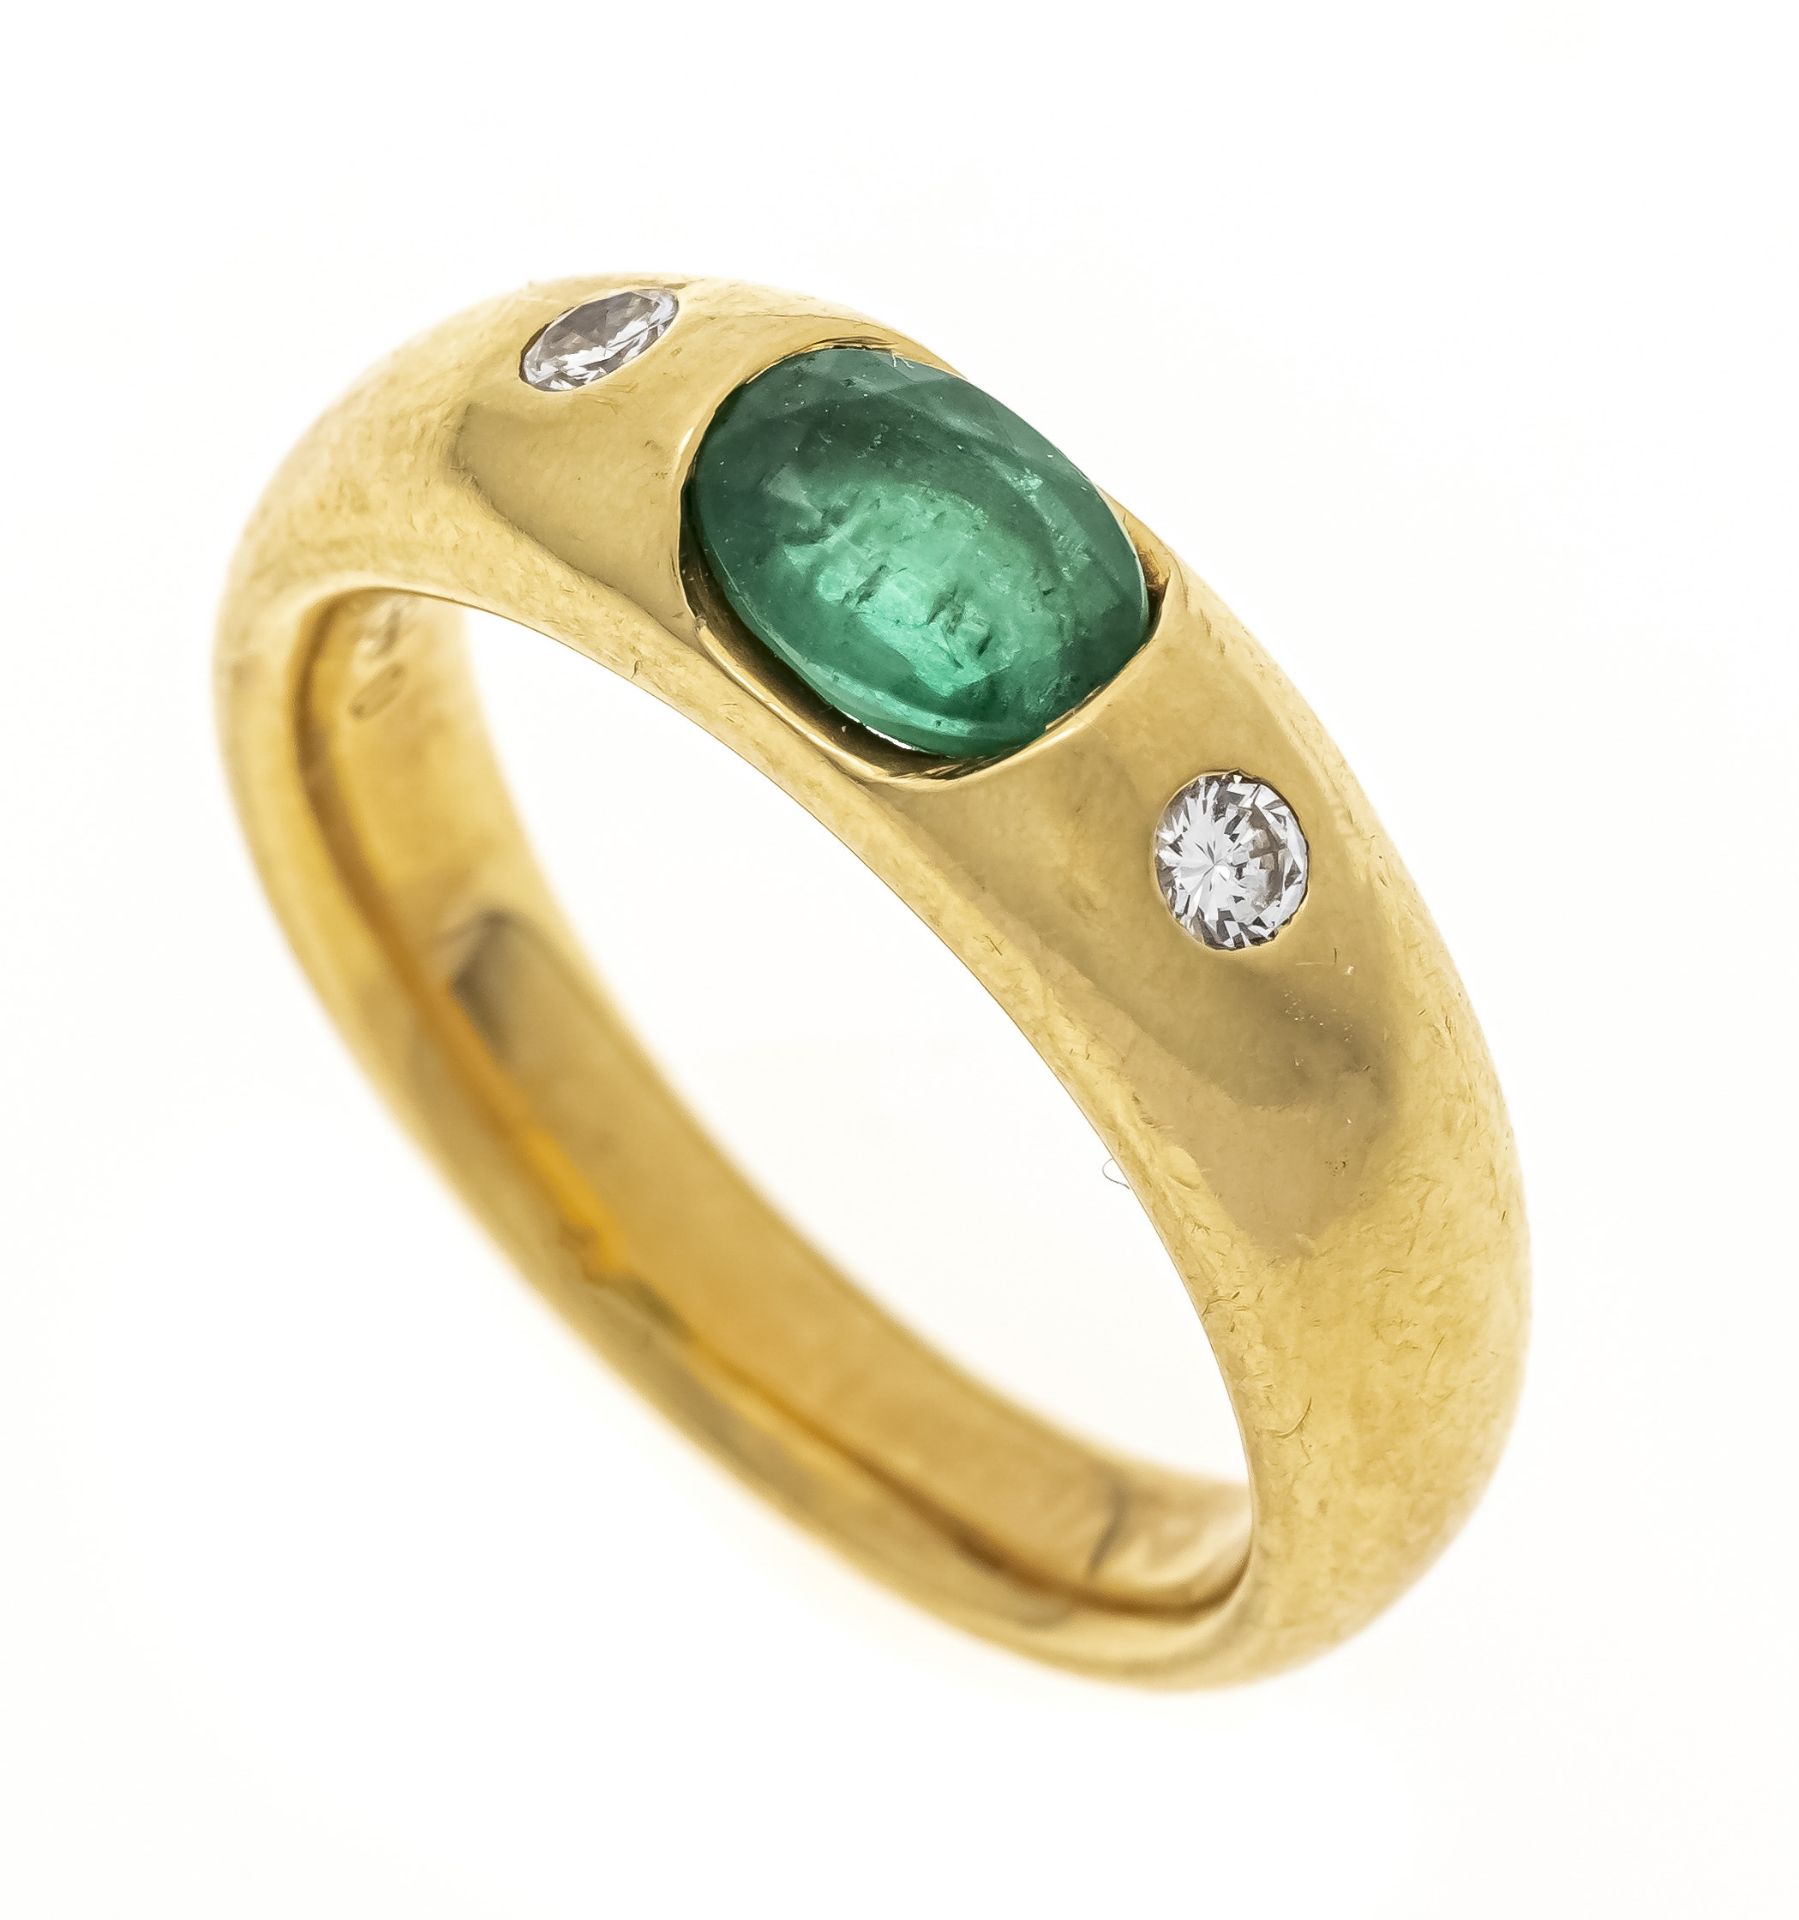 Emerald and brilliant-cut diamond band ring GG 750/000 with an oval faceted emerald 0.82 ct (